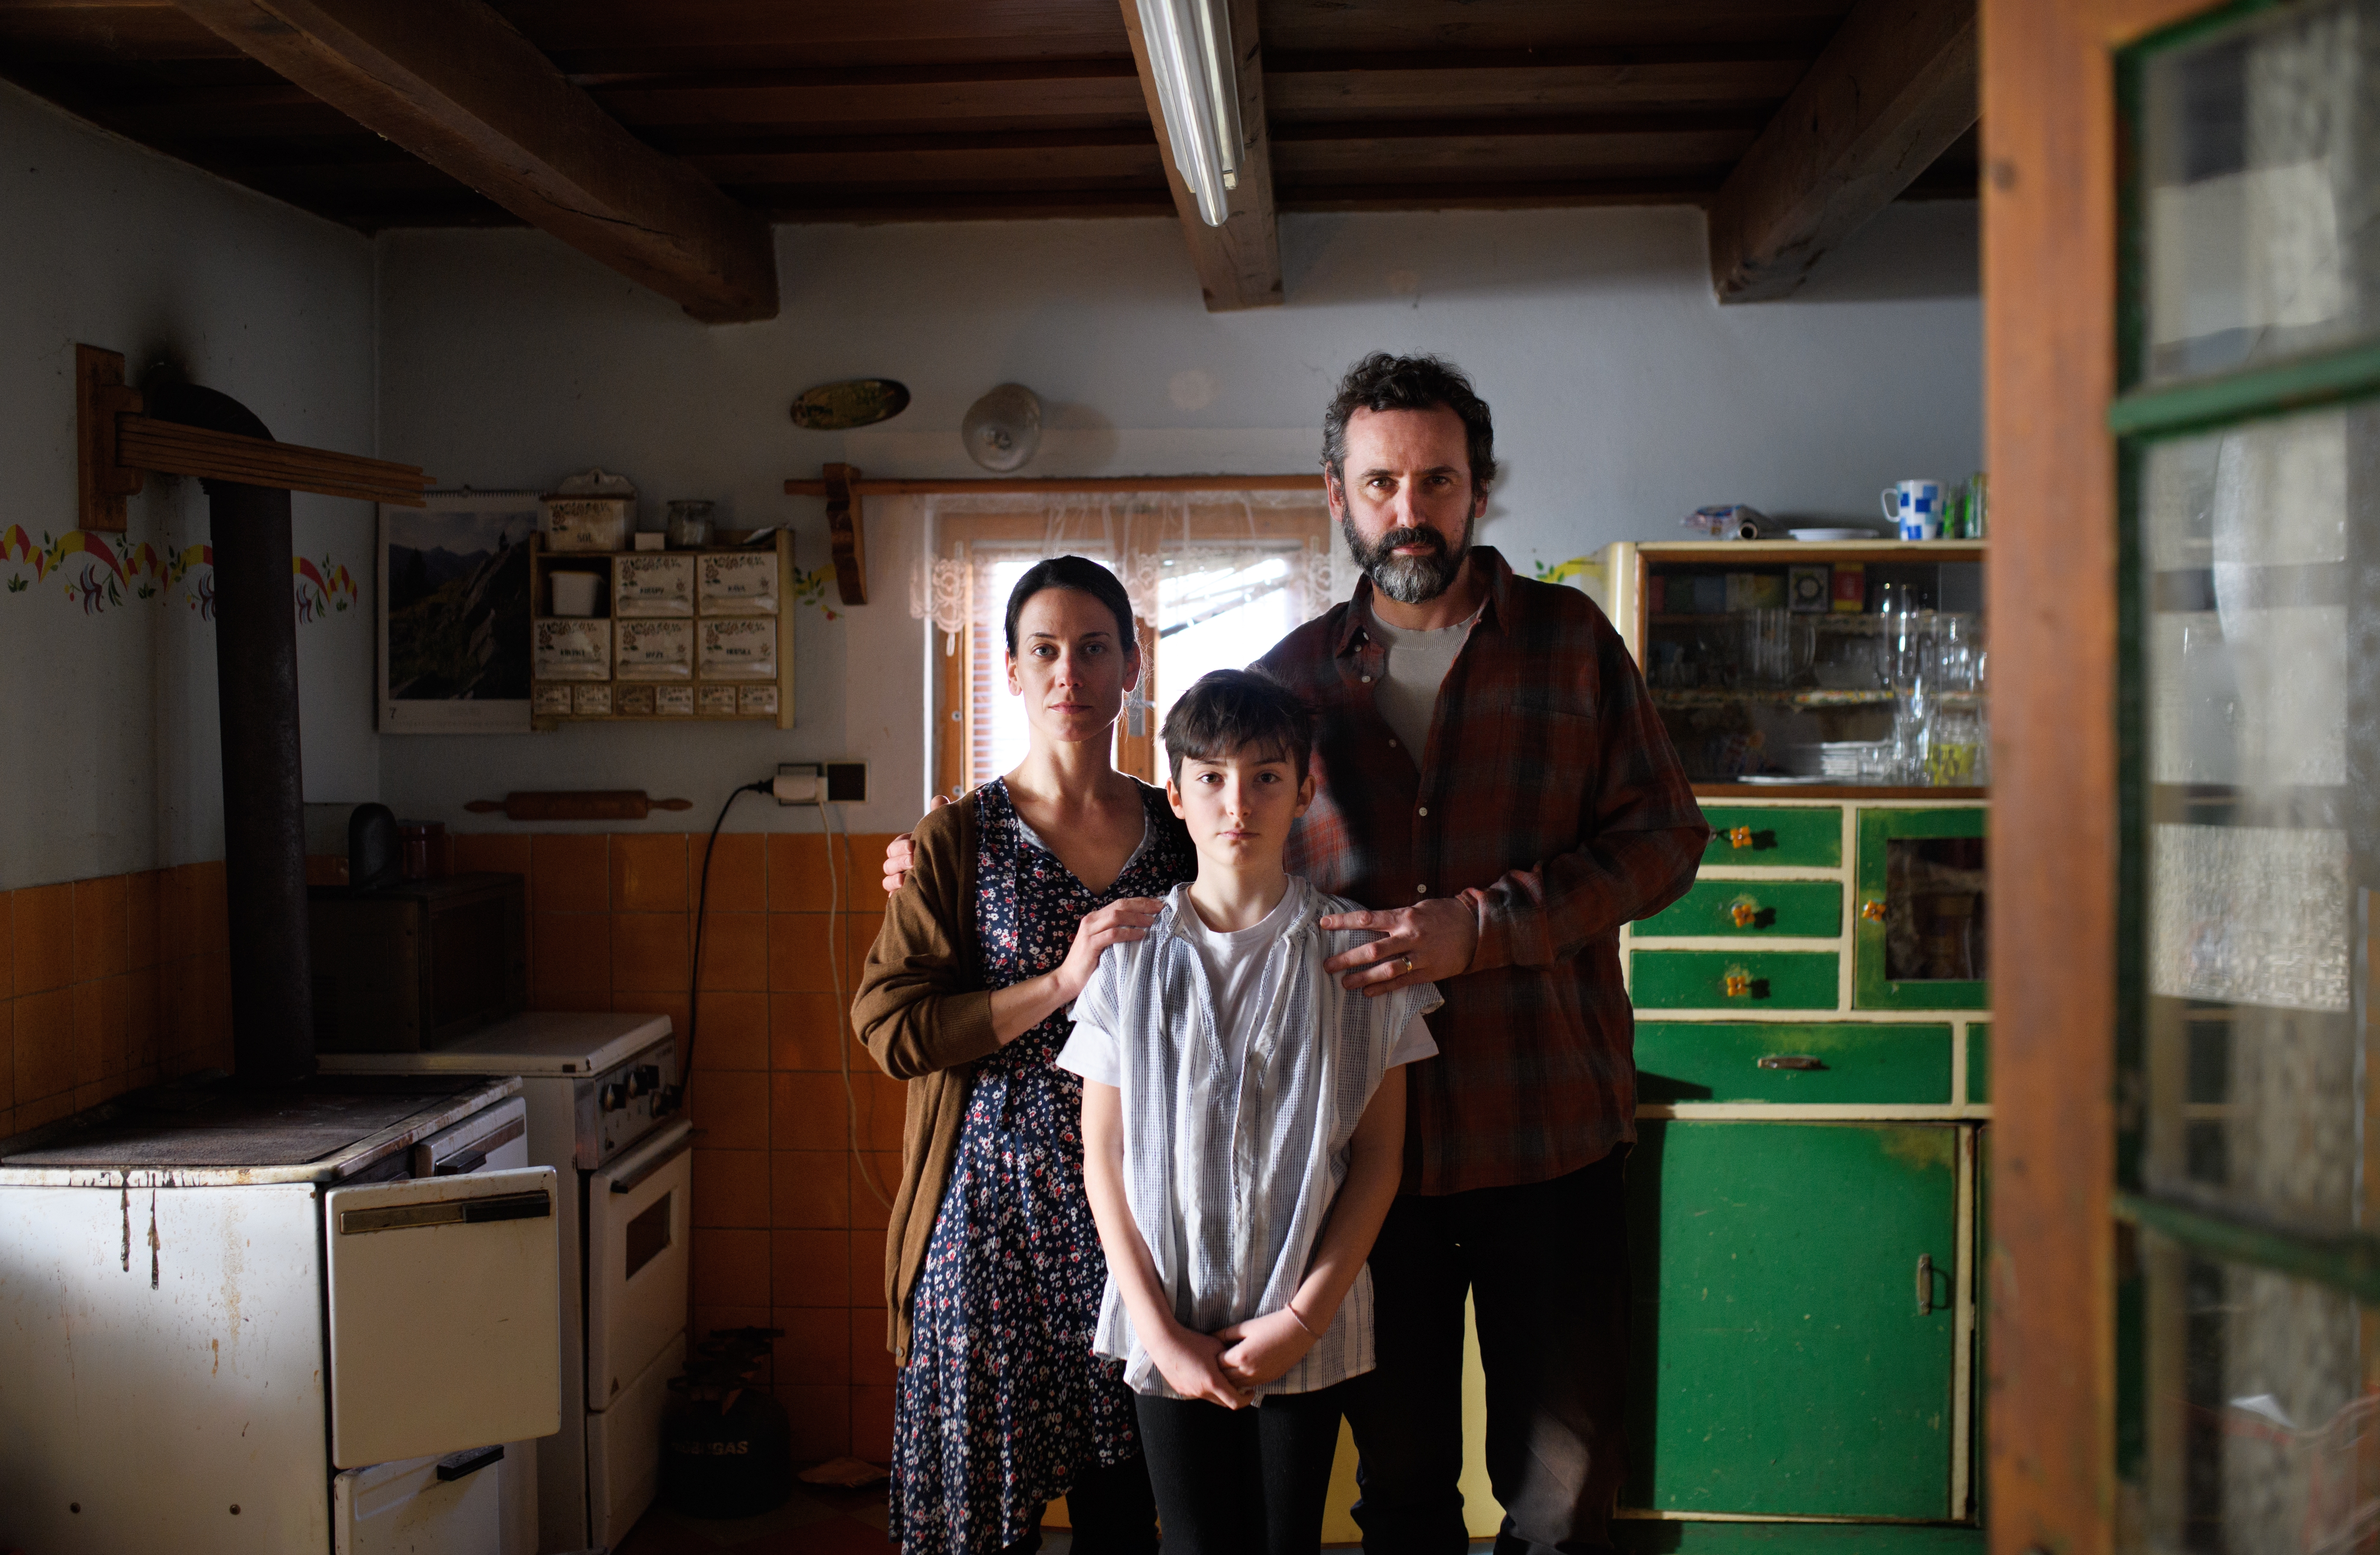 A family of three standing in the kitchen | Source: Shutterstock